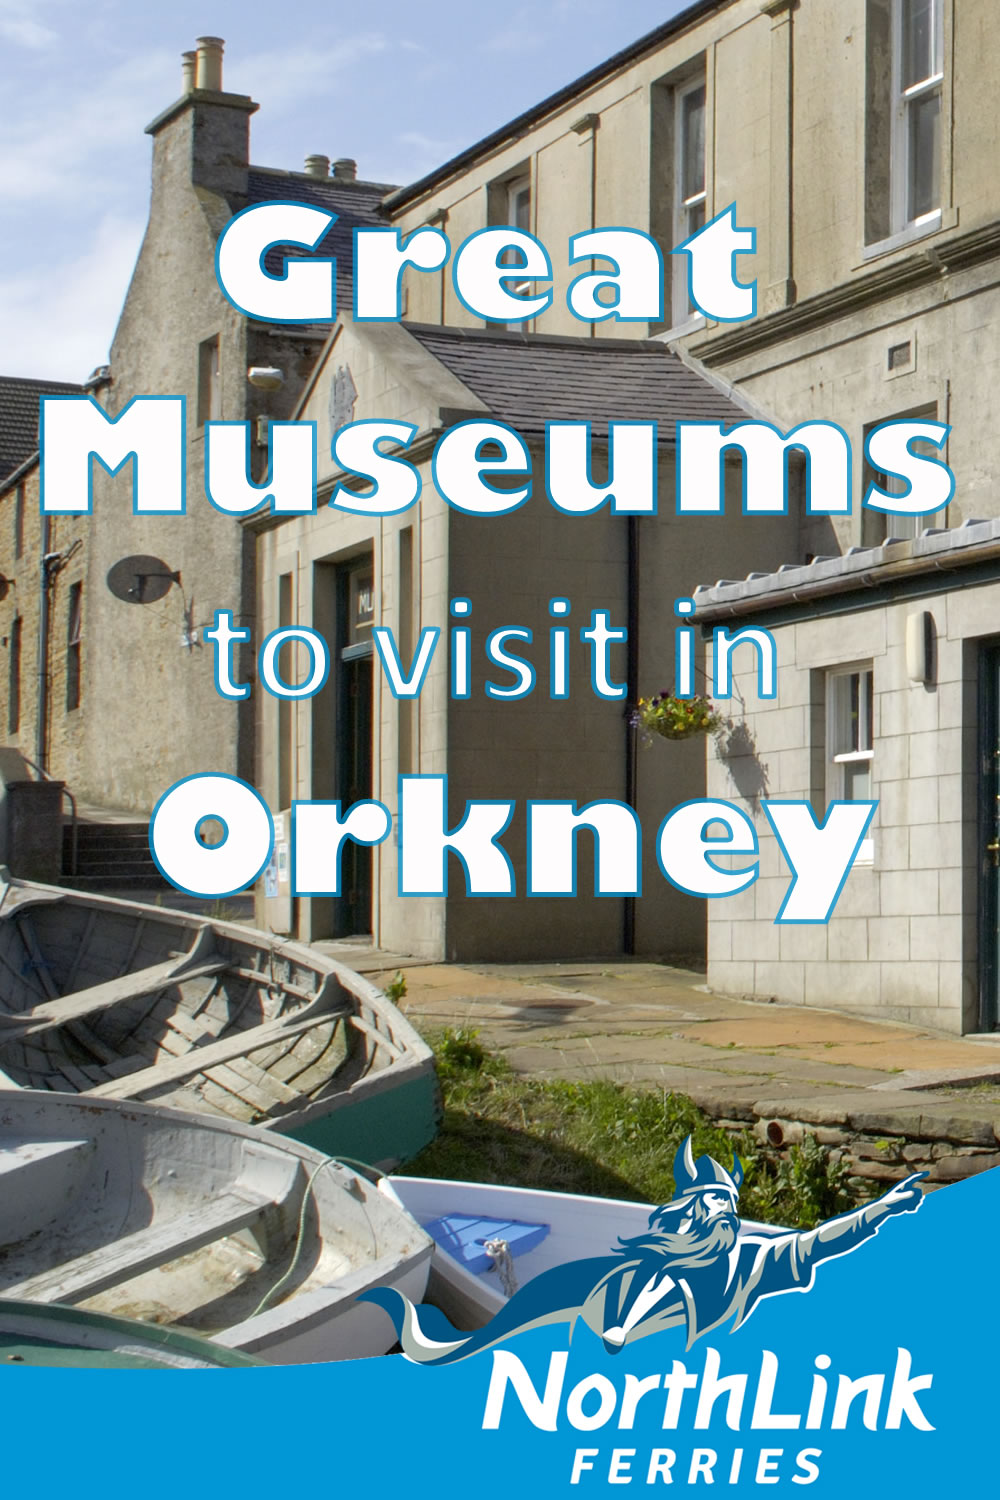 Great Museums to visit in Orkney